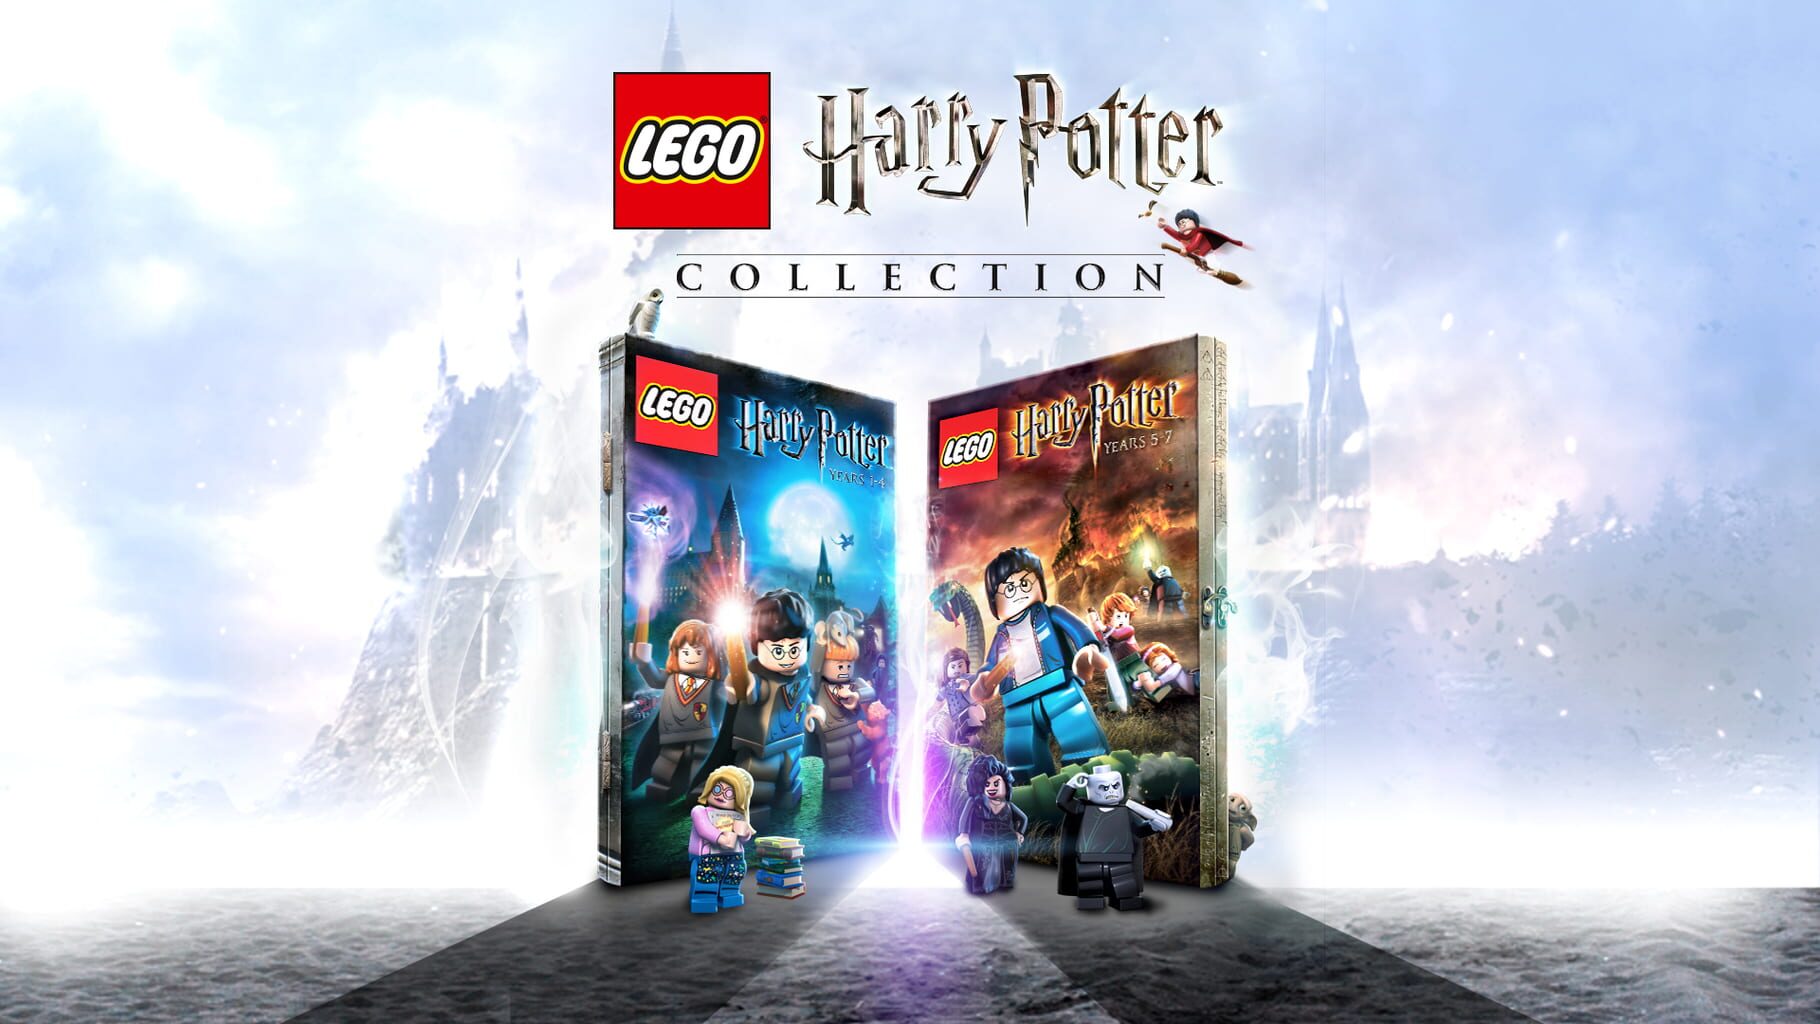 Artwork for LEGO Harry Potter Collection